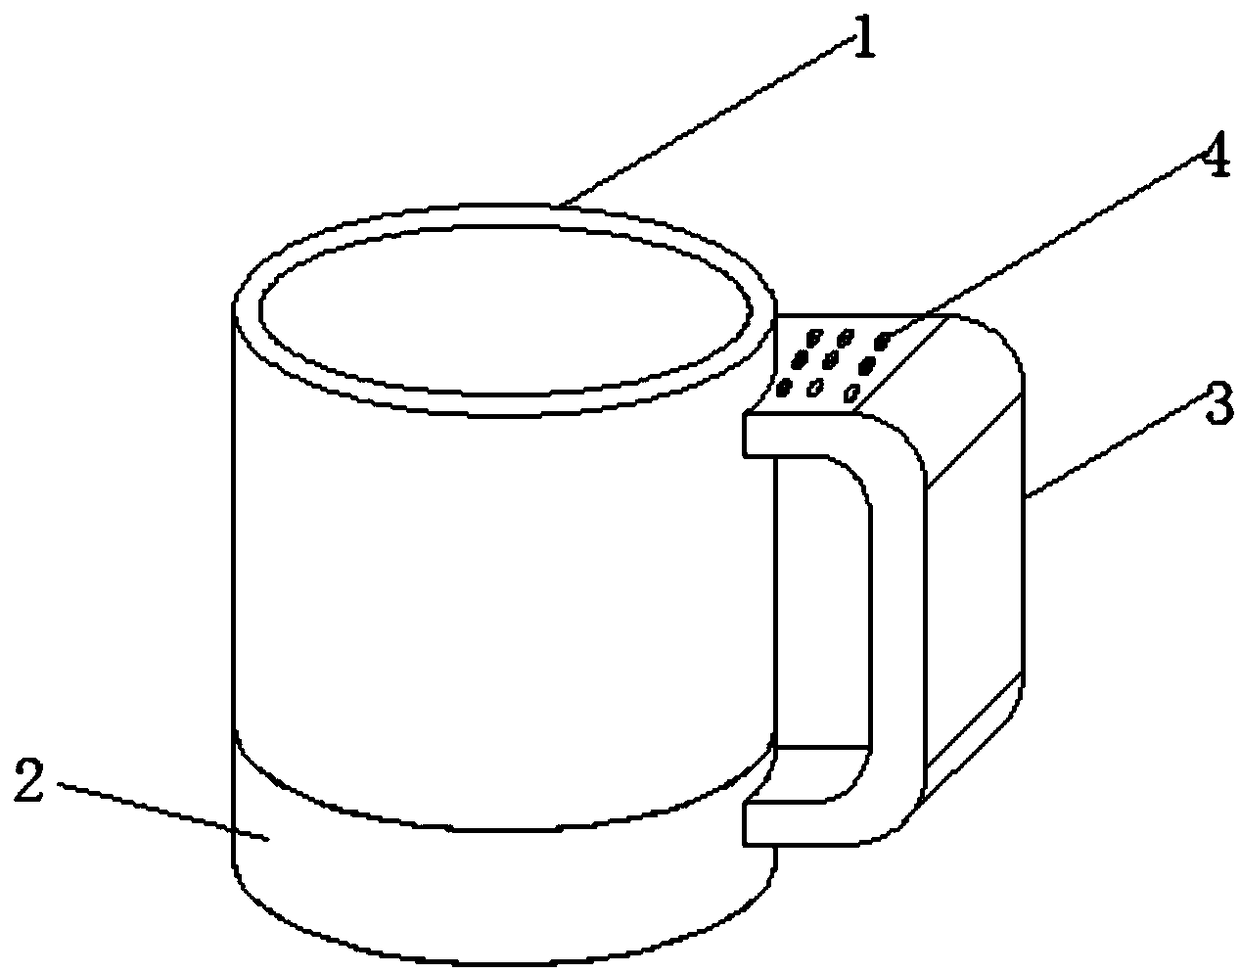 Auxiliary cooling cup based on theory of changing motion state of hot water